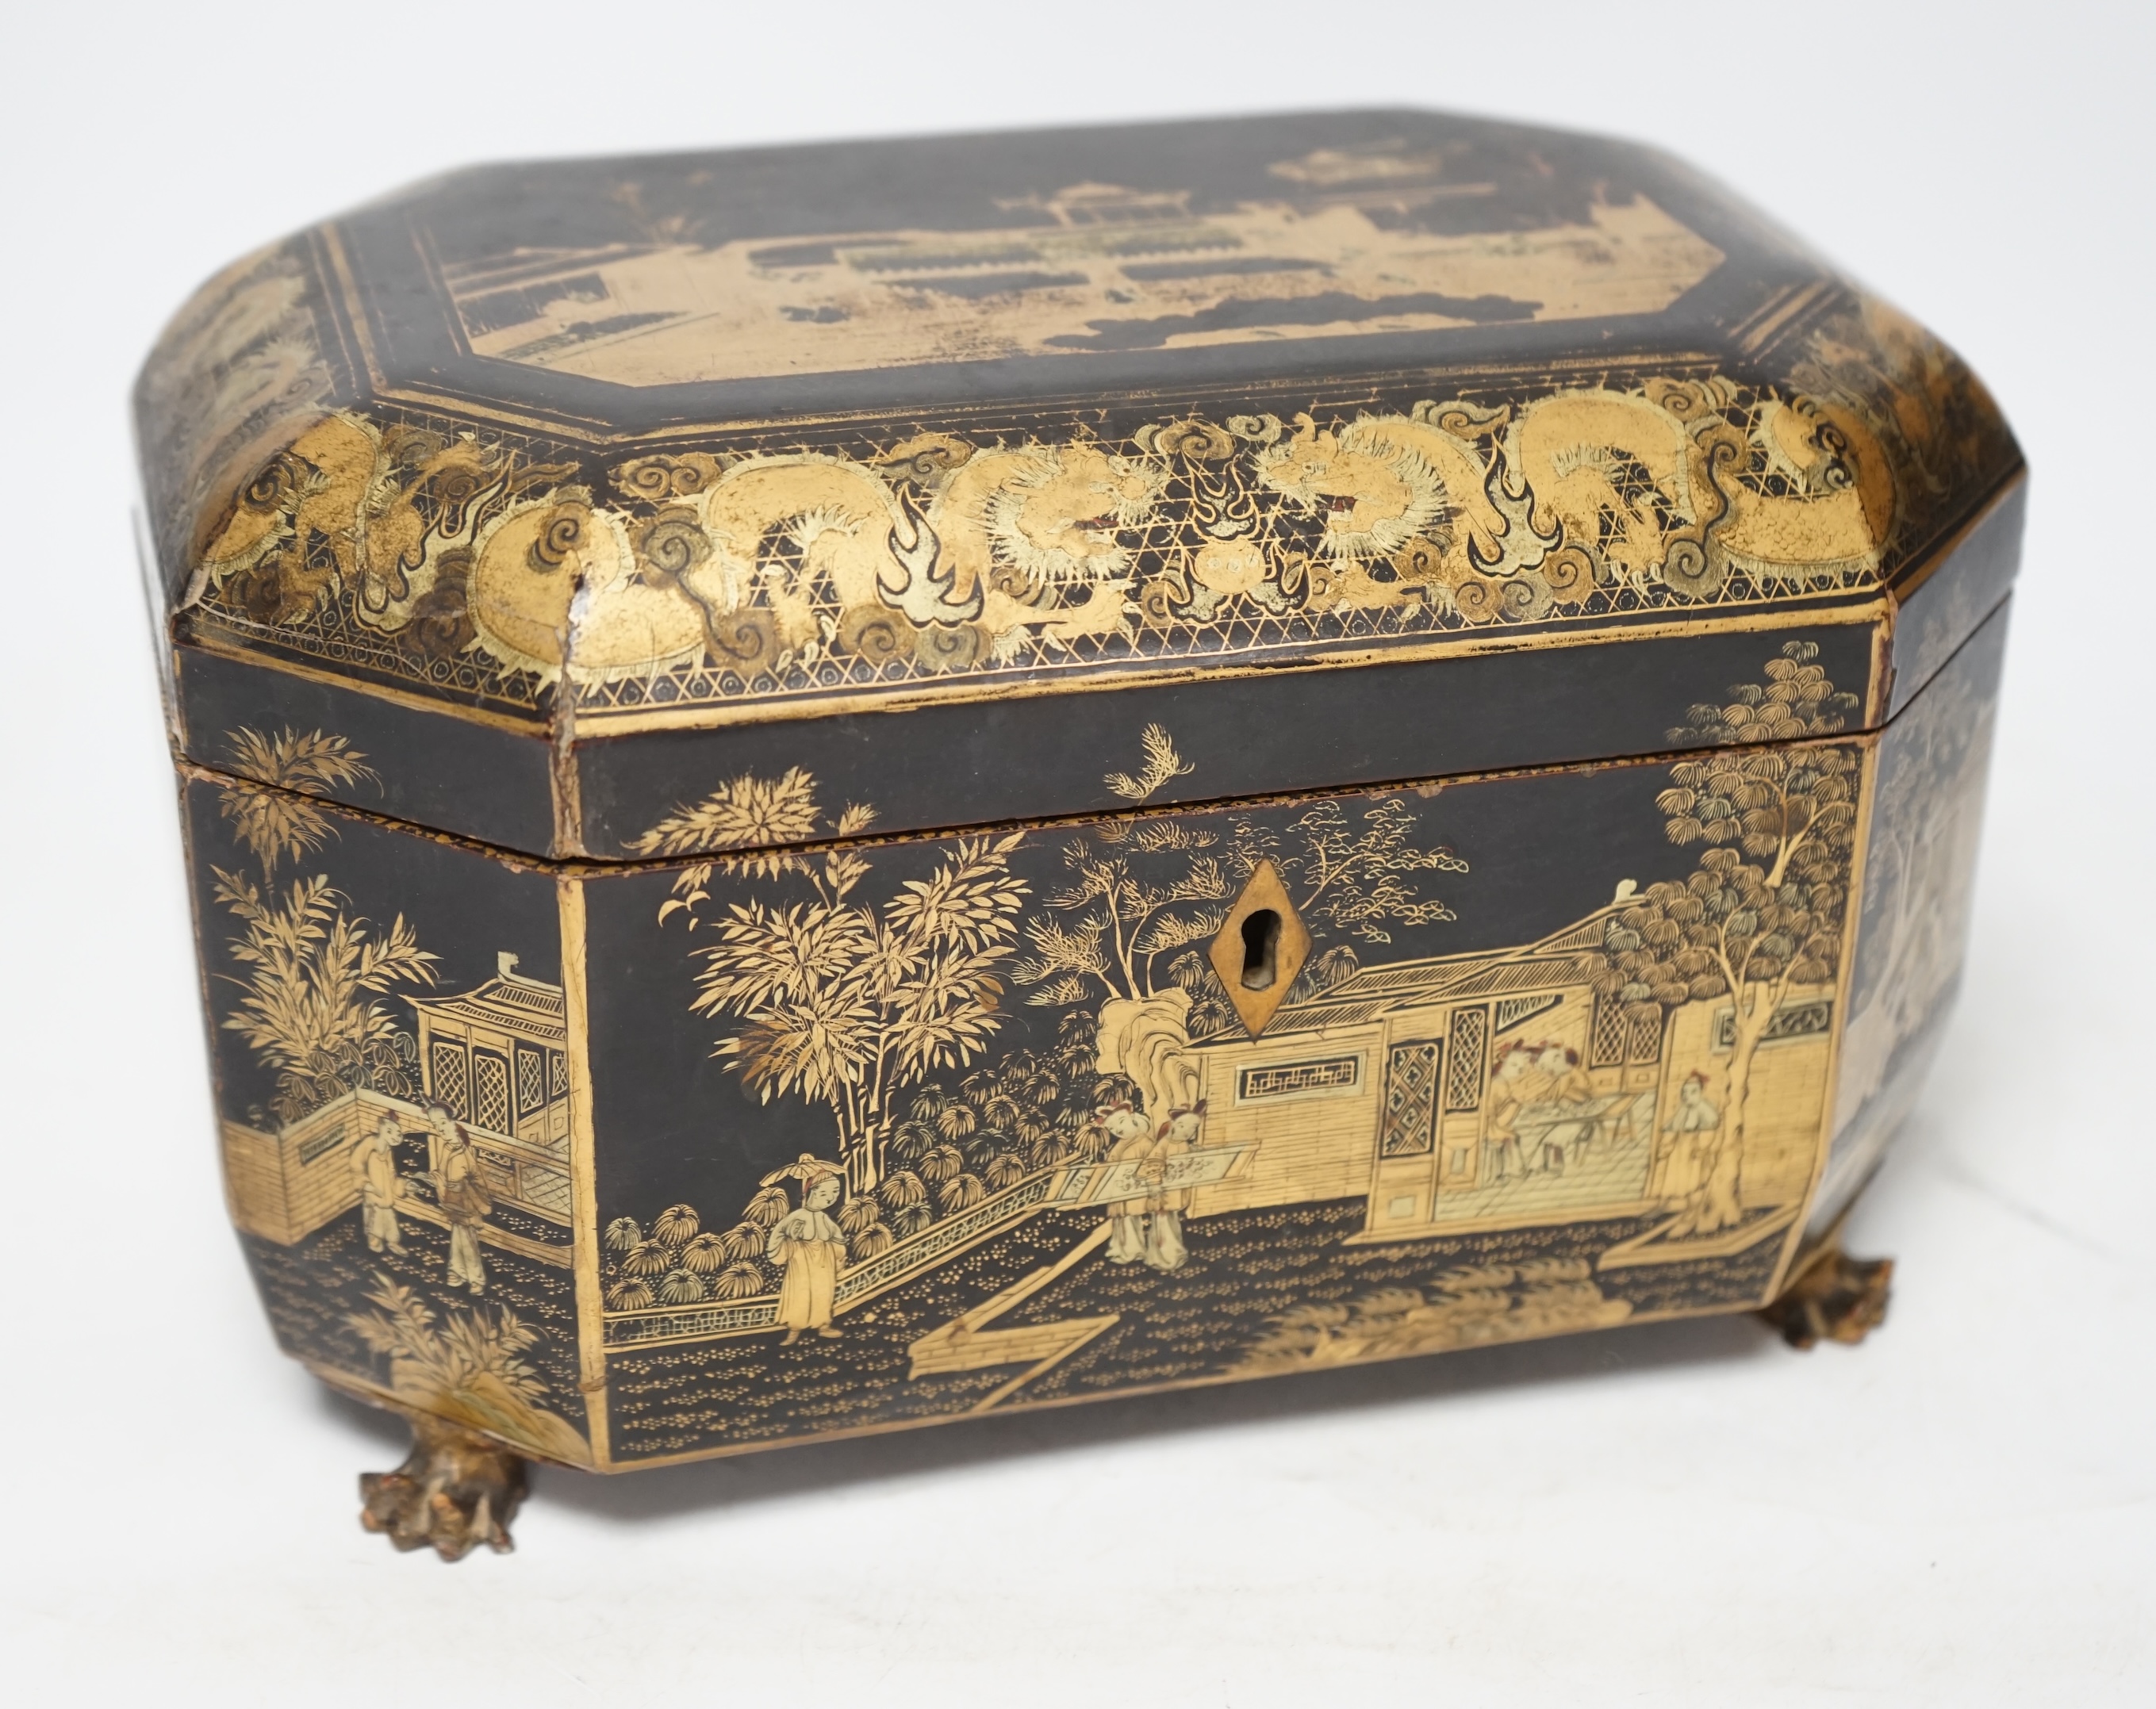 A mid 19th century Chinese export black and gold lacquer tea caddy, retaining engraved pewter tea canisters, raised on paw feet, 26cm wide. Condition - poor